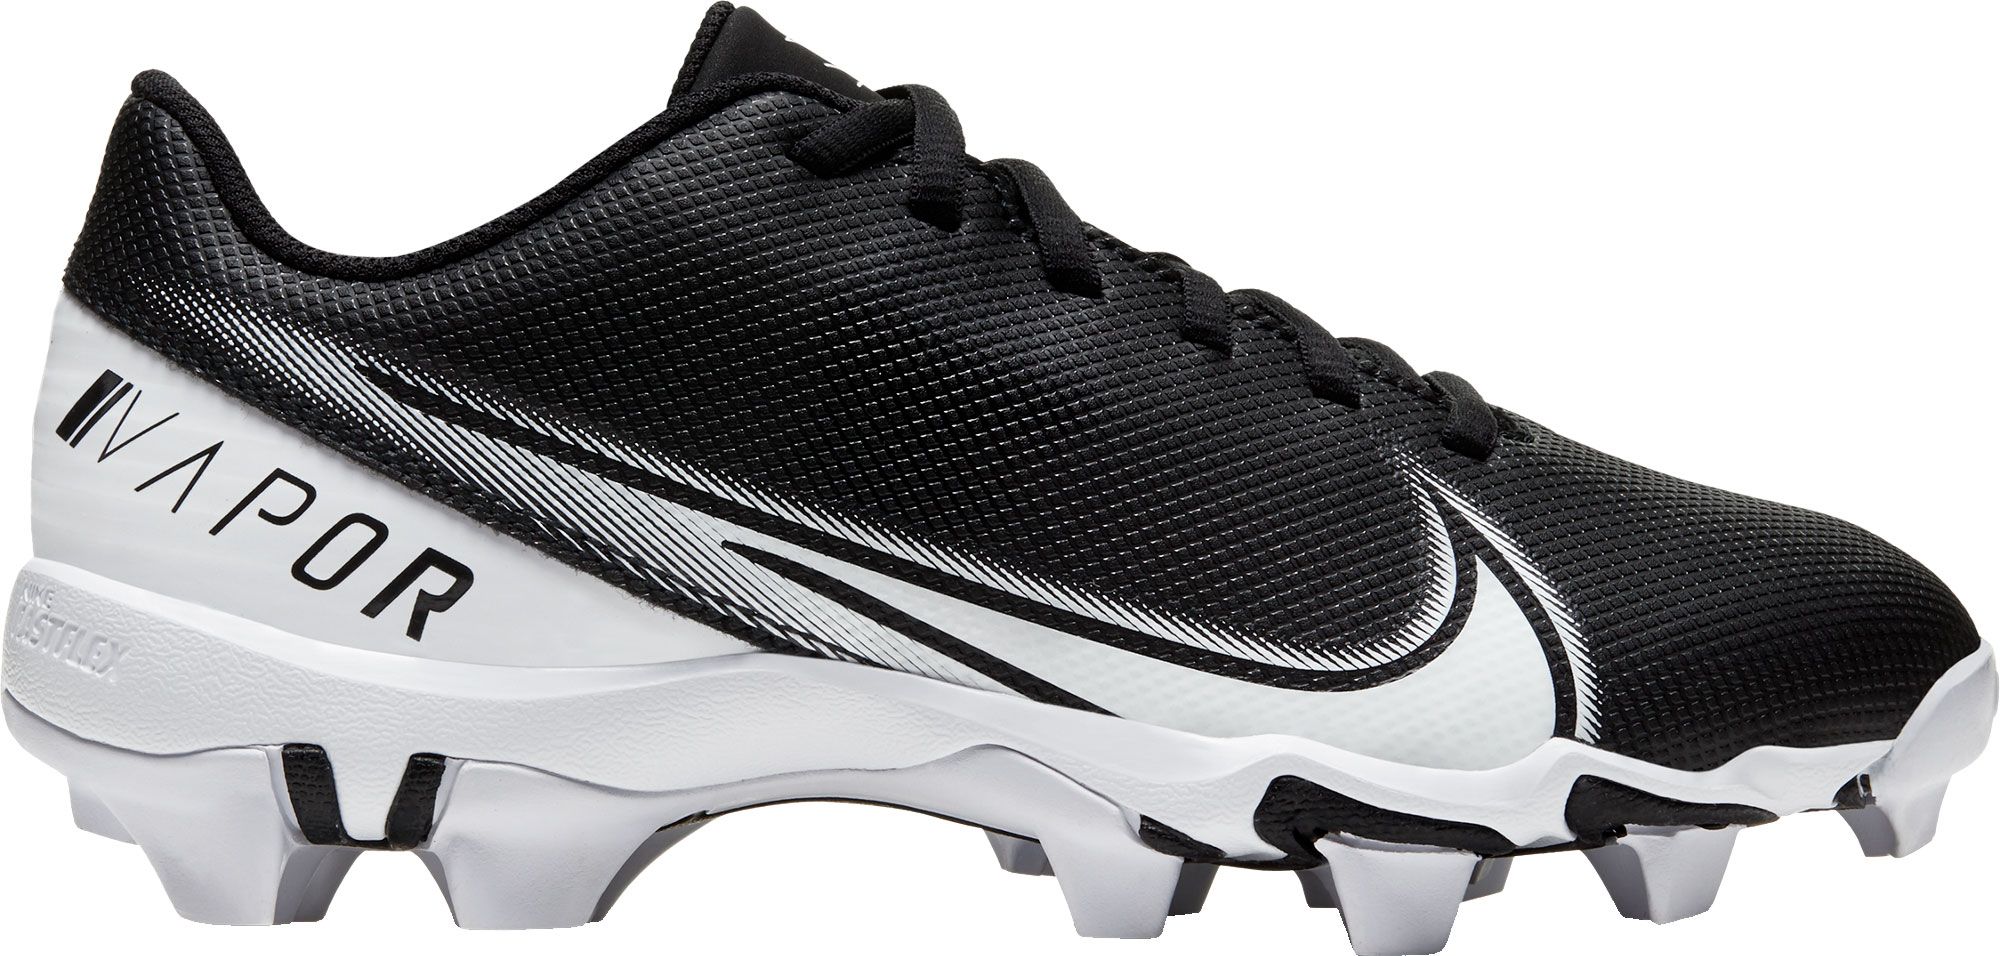 nike youth cleats football